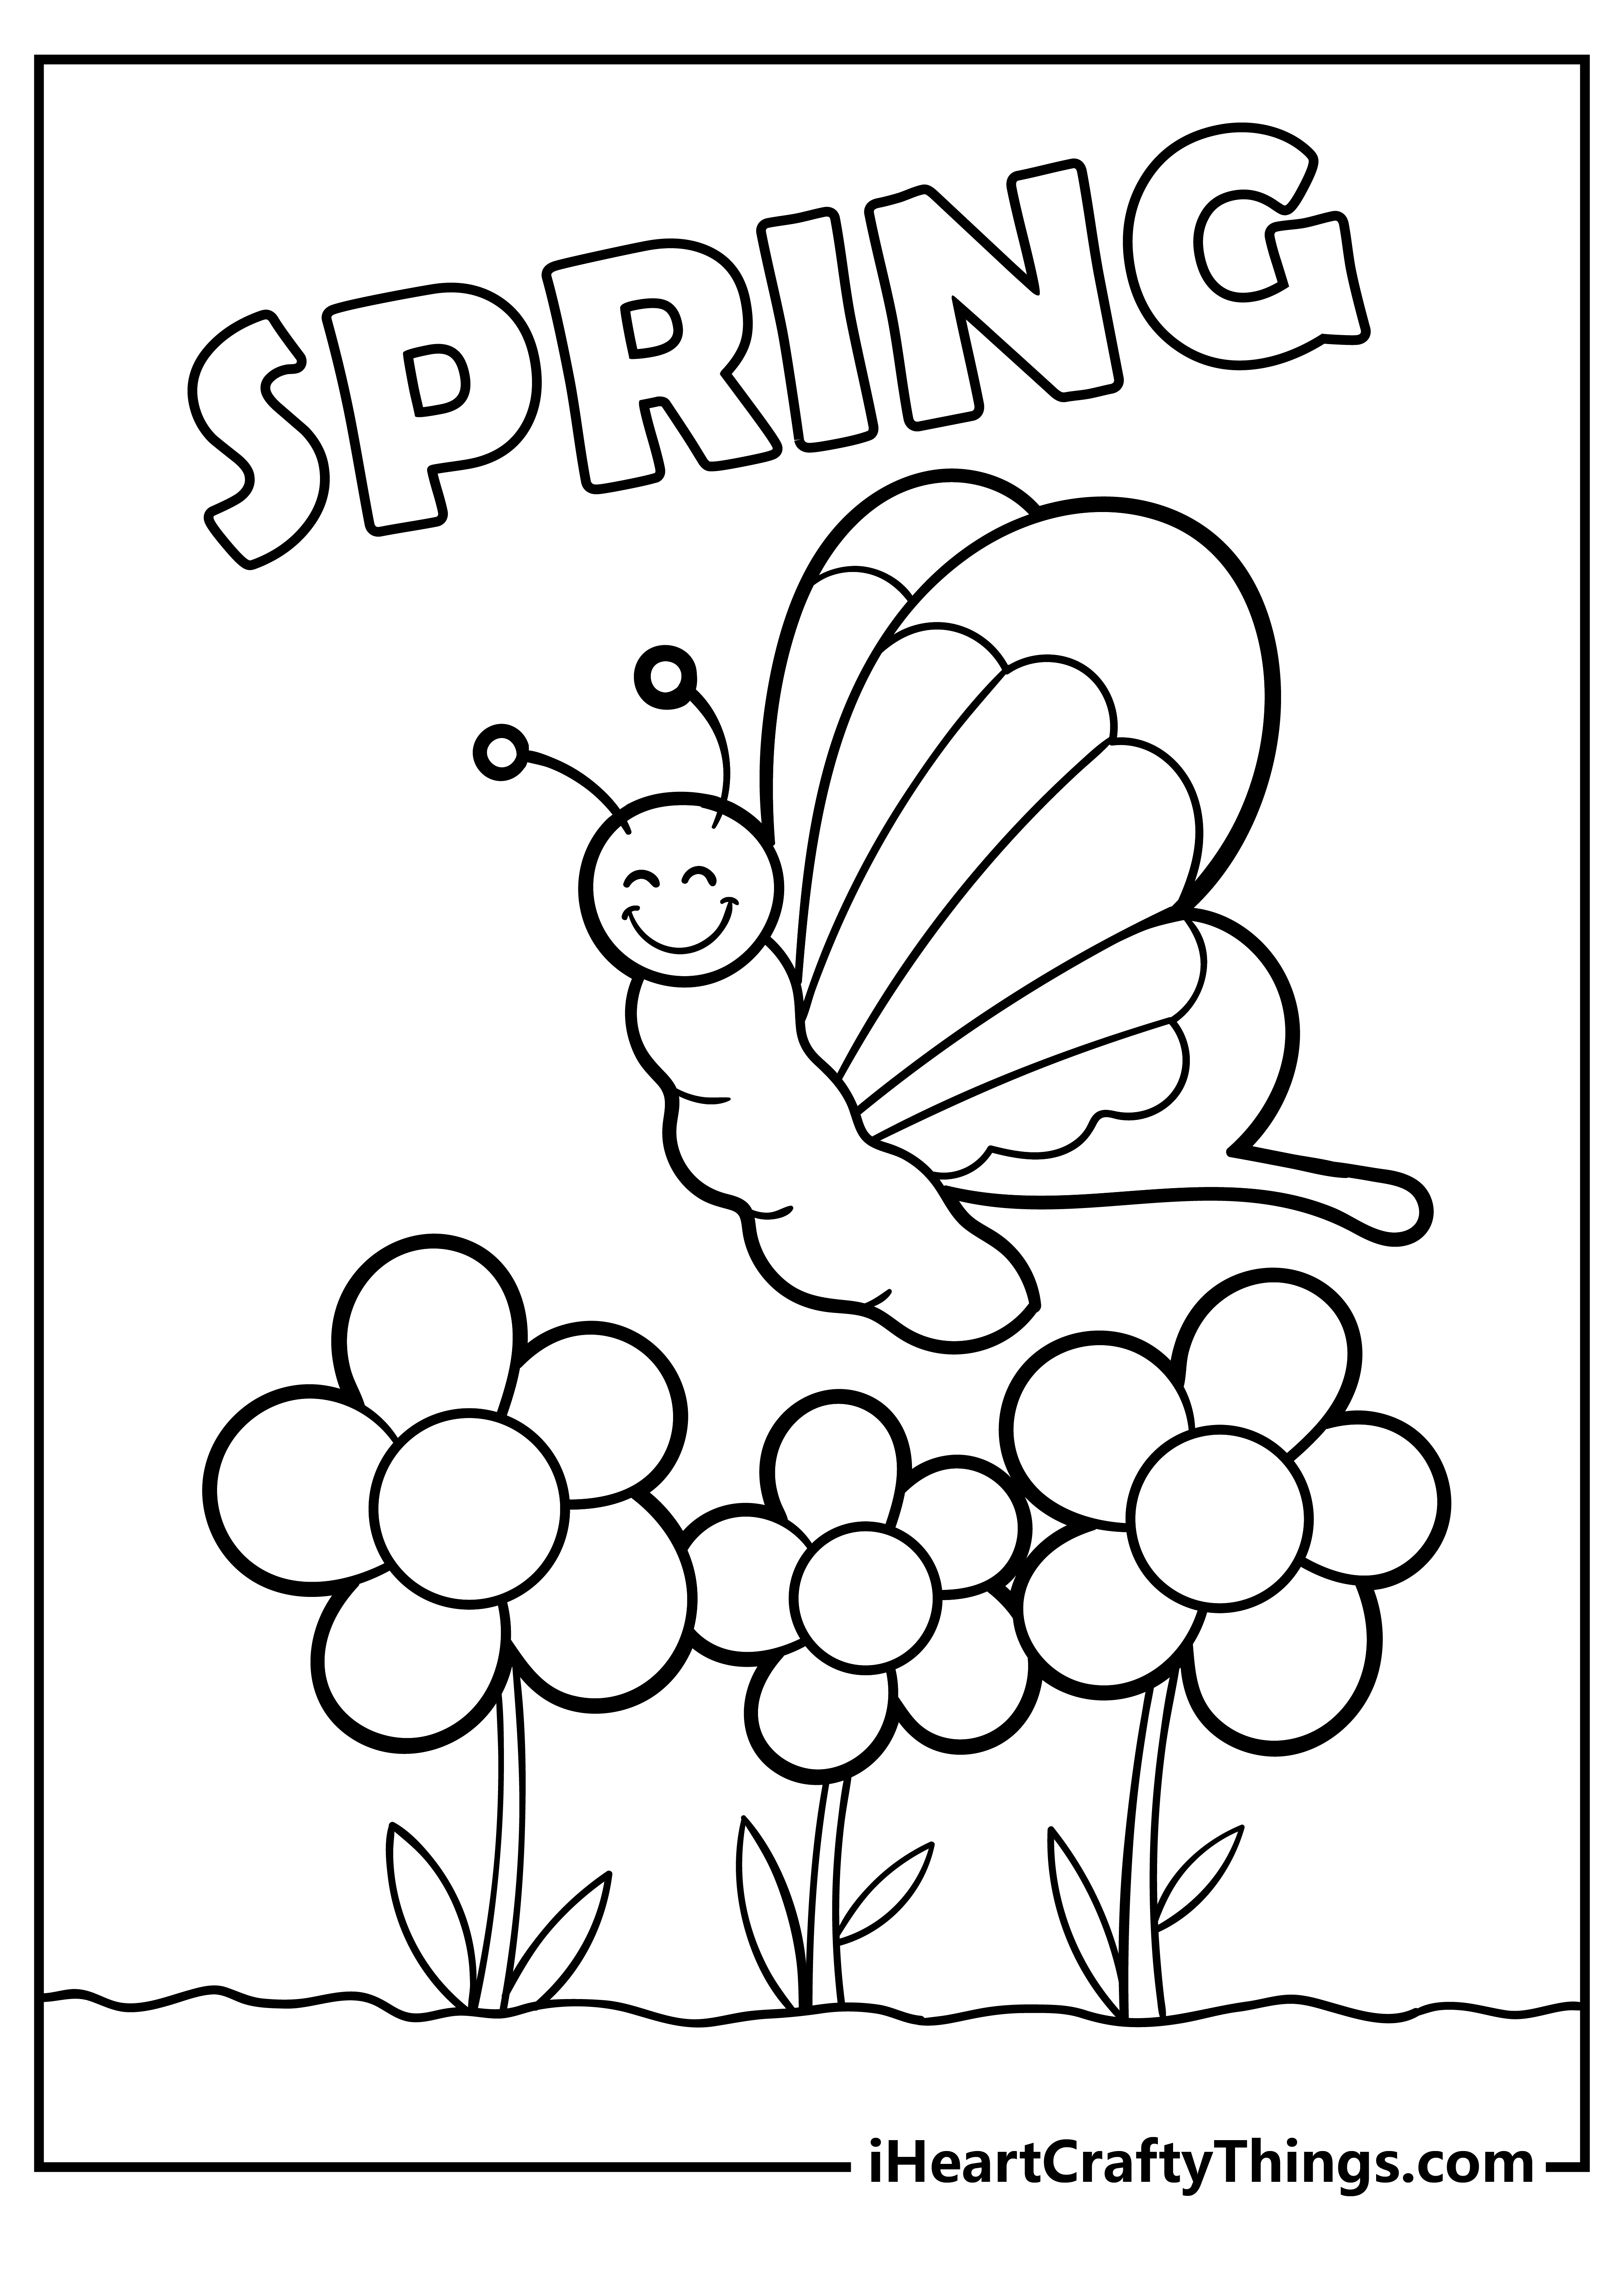 Spring coloring pages spring coloring sheets spring coloring pages preschool coloring pages